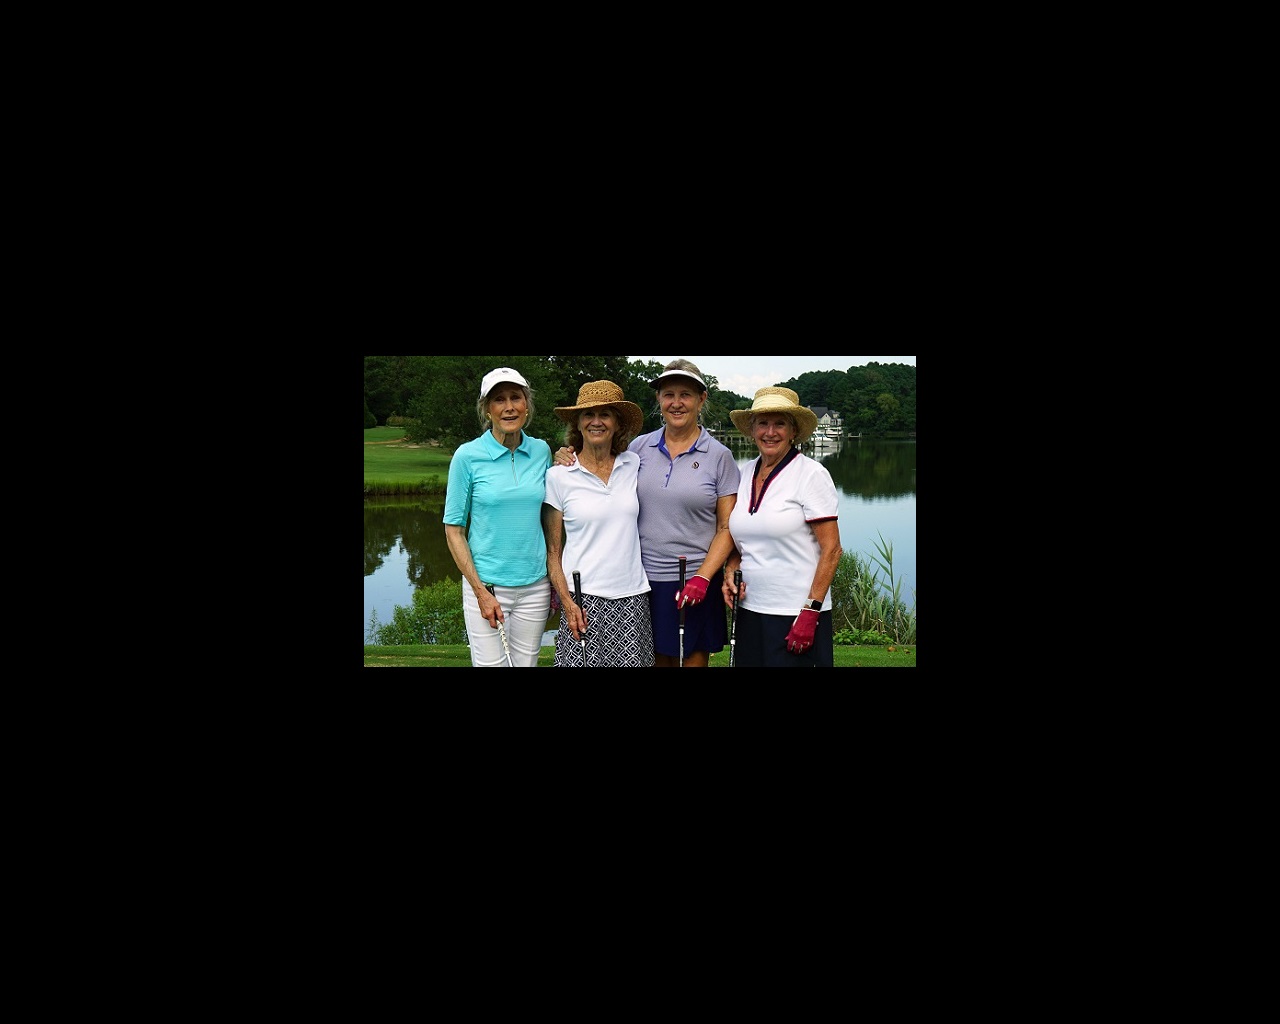 Four women stand side by side with their golf clubs on a golf course.